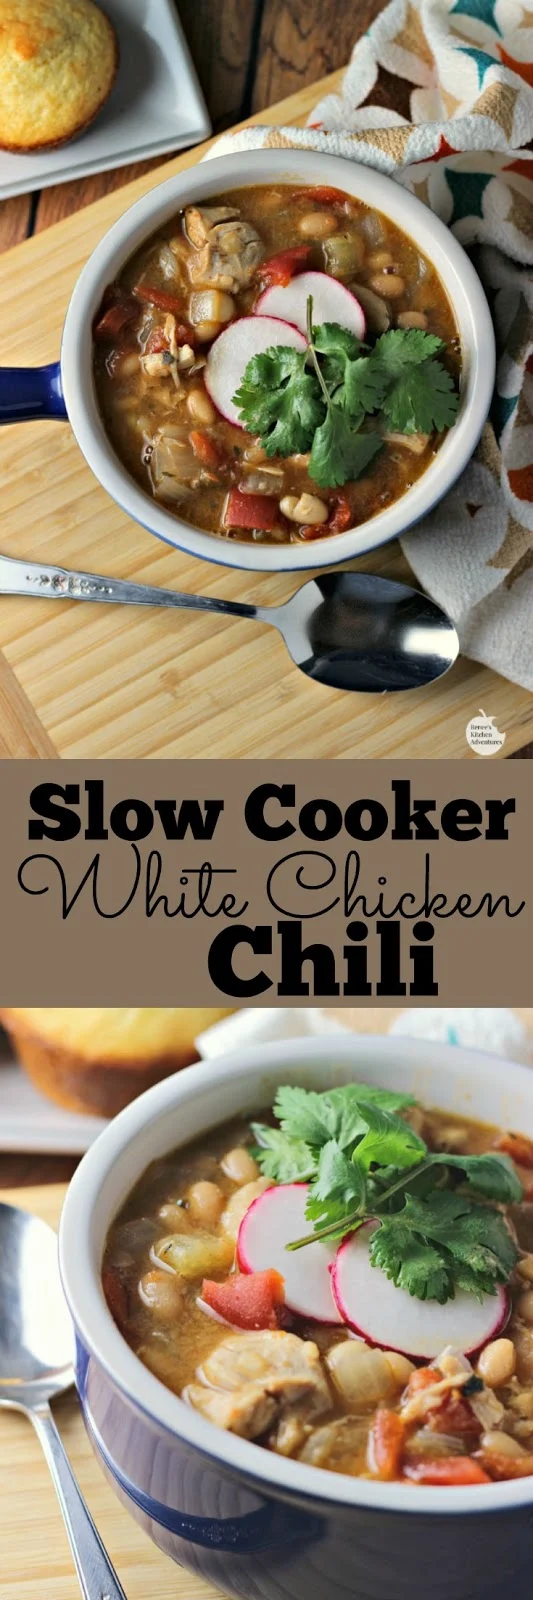 Slow Cooker White Chicken Chili | by Renee's Kitchen Adventures - healthy recipe for chili made with chicken and beans.  Easy to make and tastes so good!!